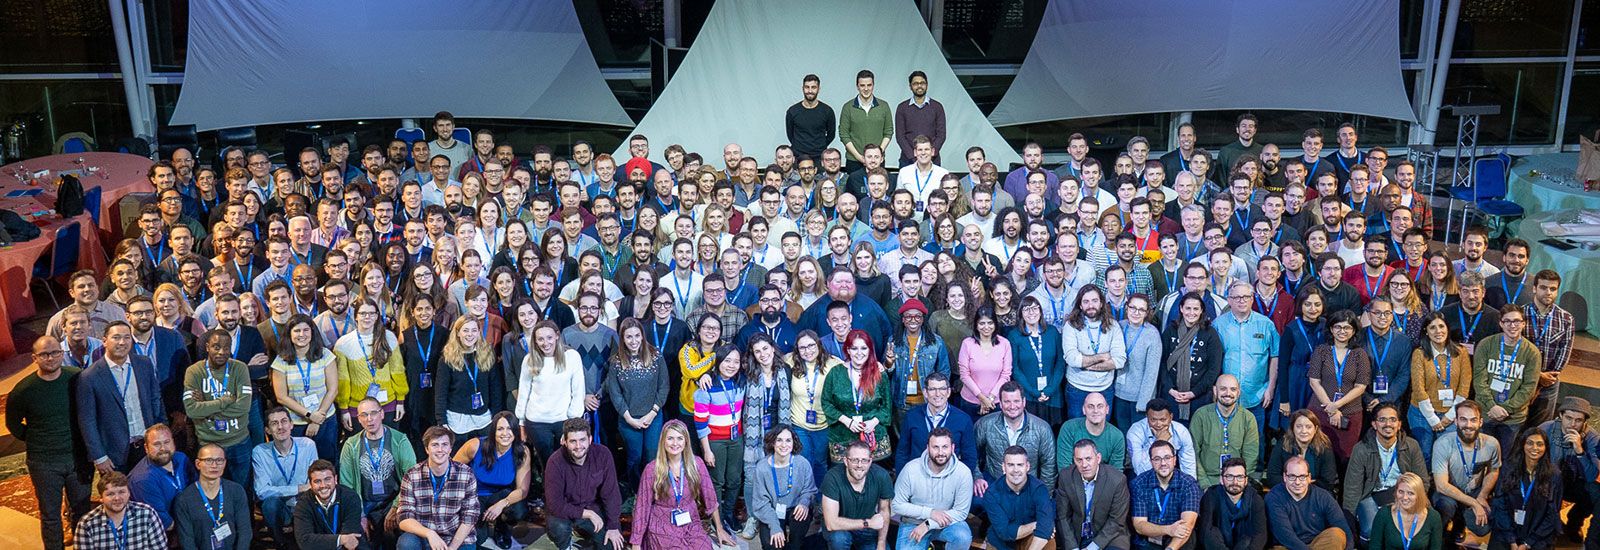 The 500-strong team at Onfido